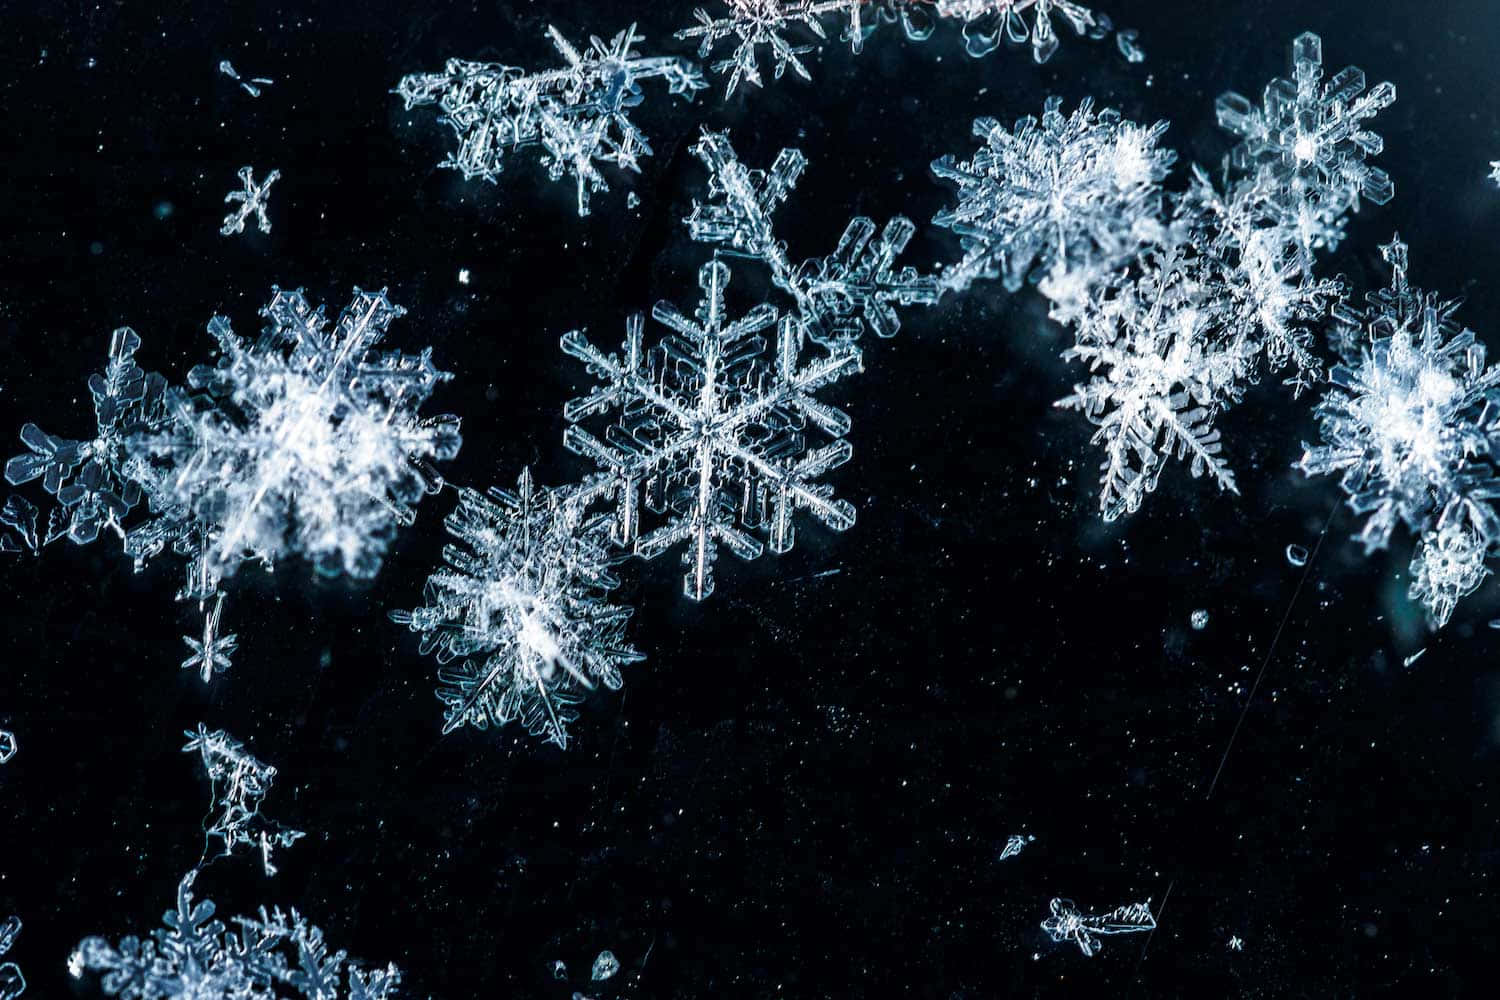 "The intricate beauty of snowflakes"